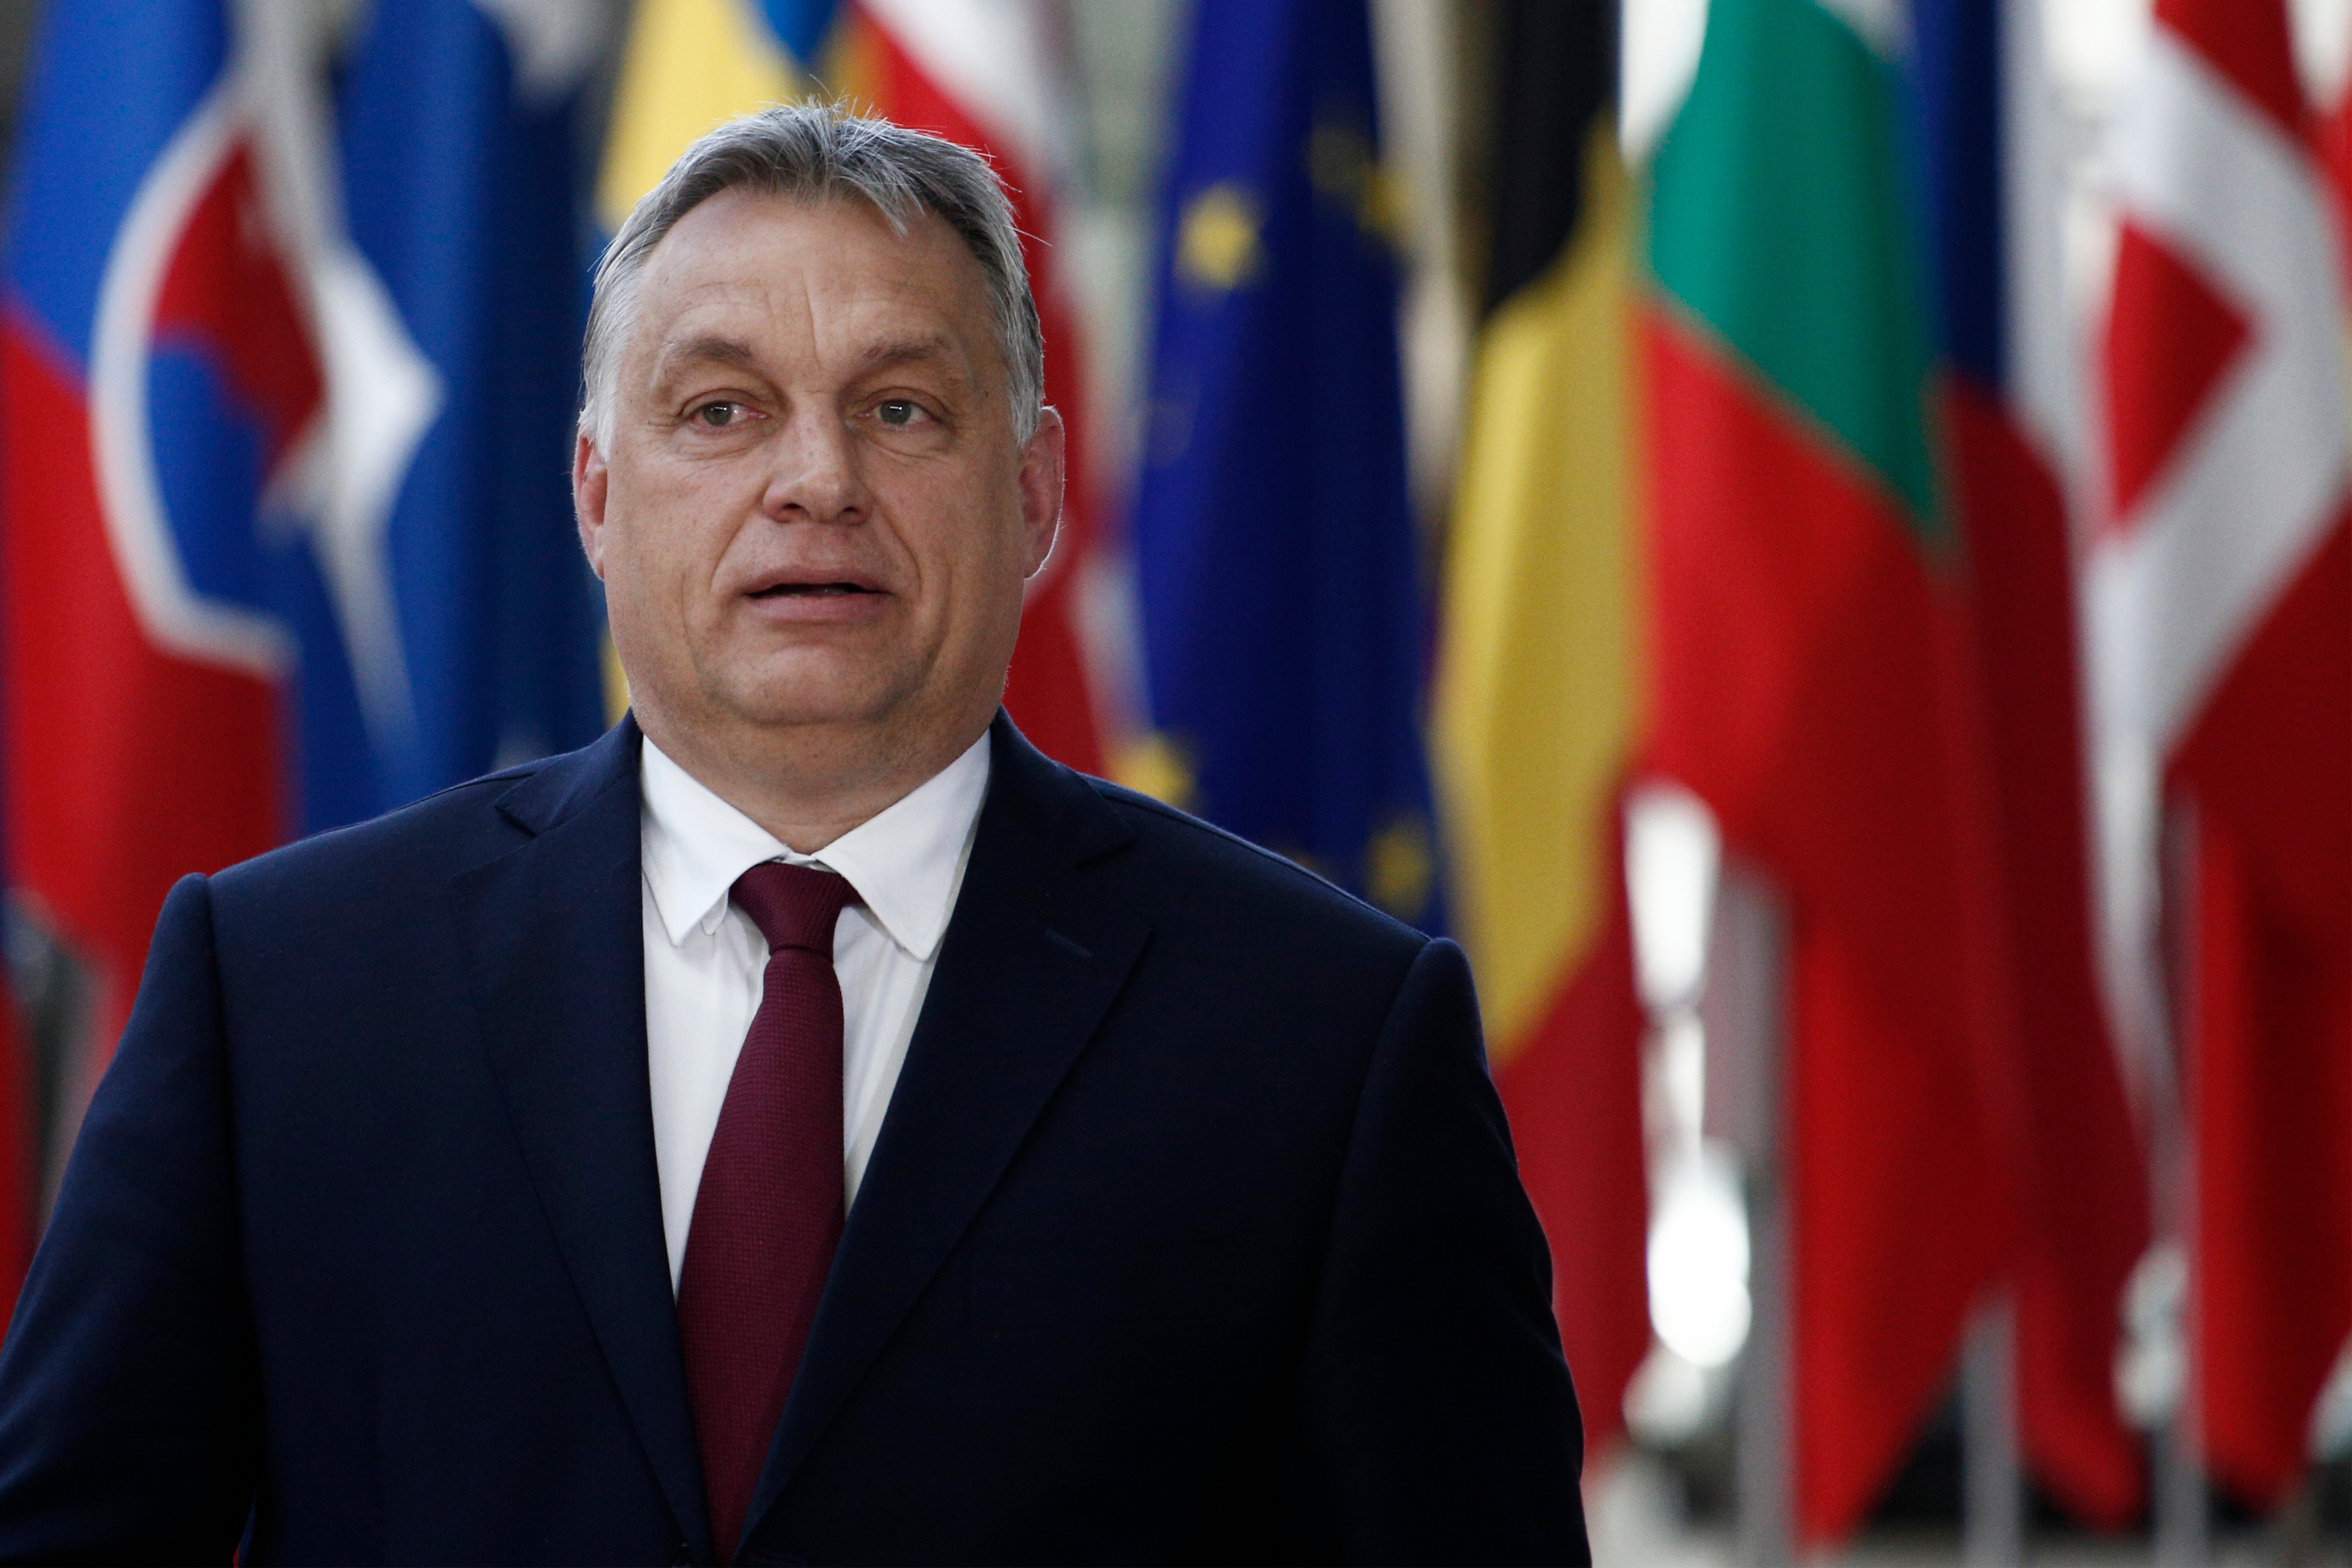 Pro-Putin Hungarian Leader Joins Twitter: 'Where Is My Good Friend, Donald Trump?'